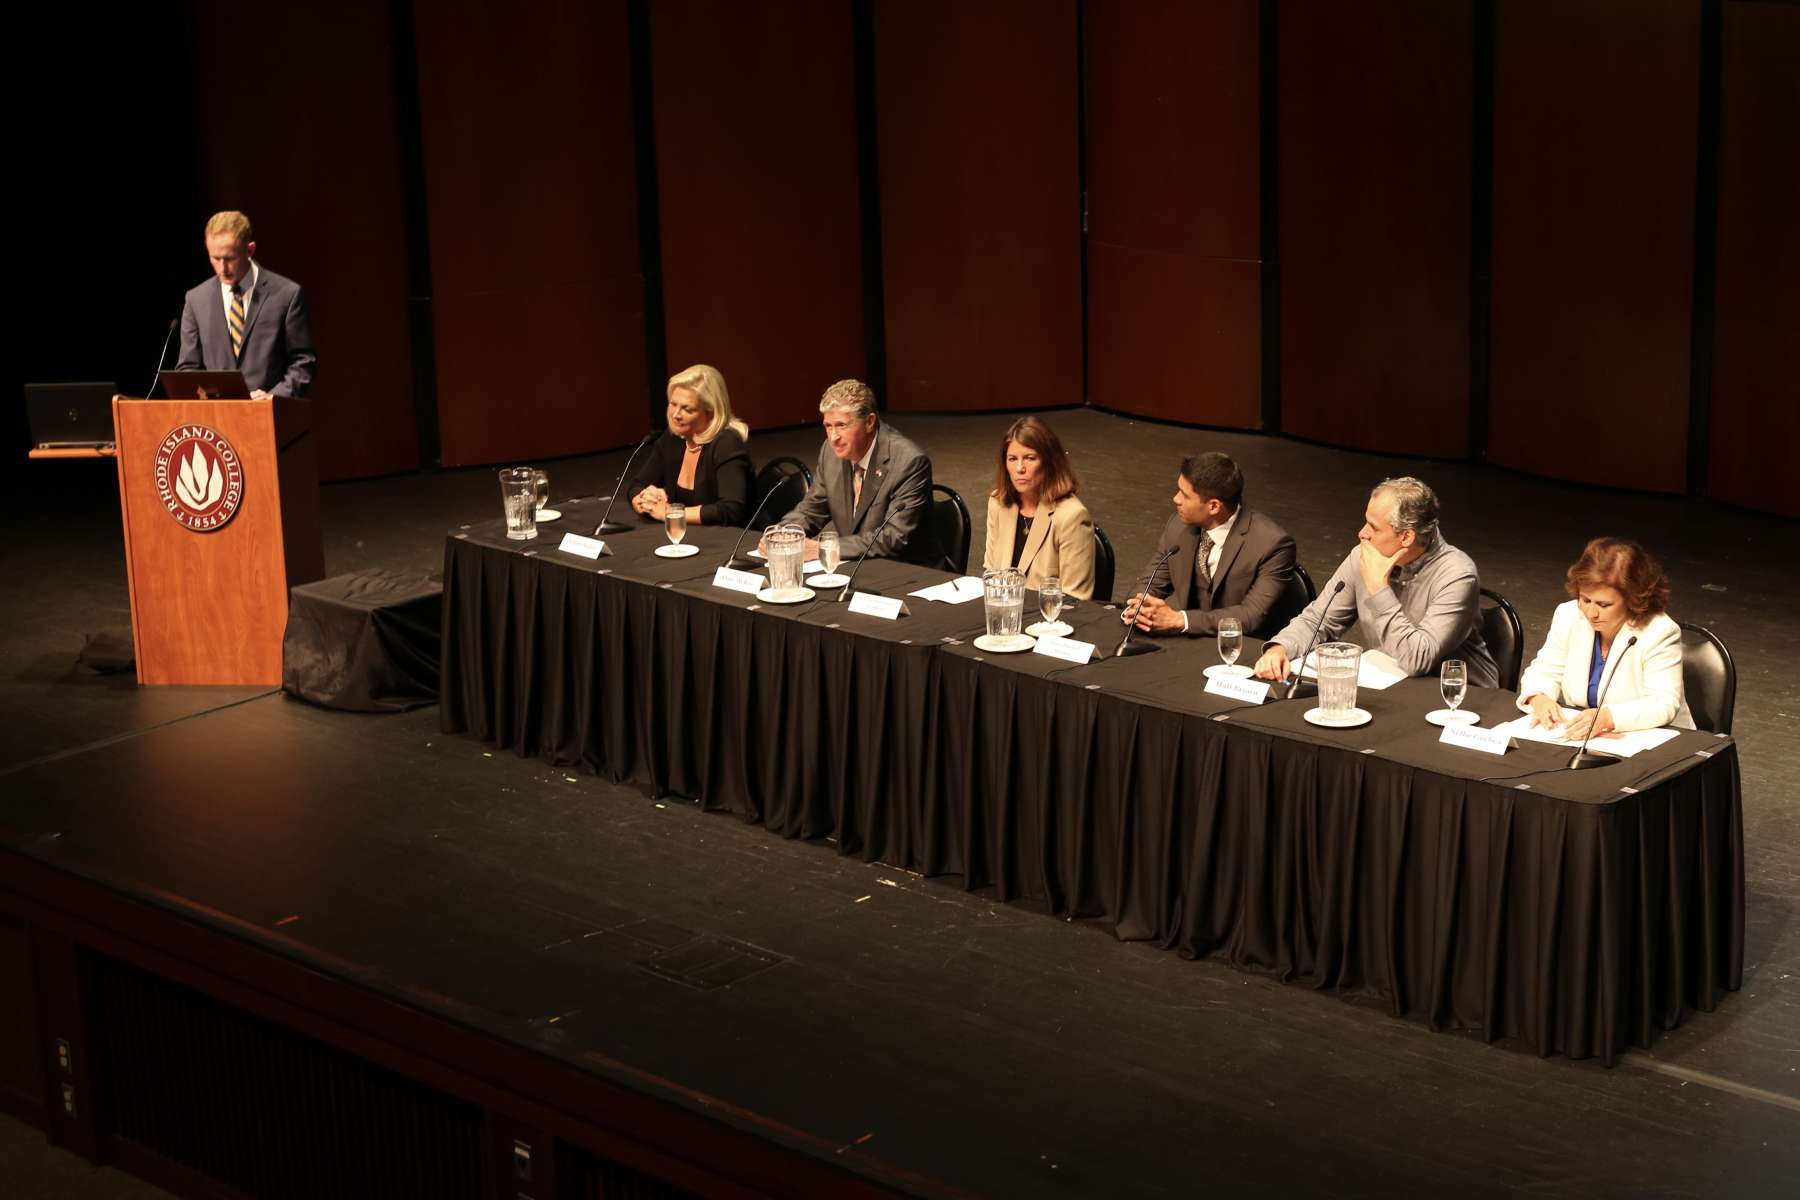 Rhode Island News: Candidates for governor grilled on enviro issues at climate forum